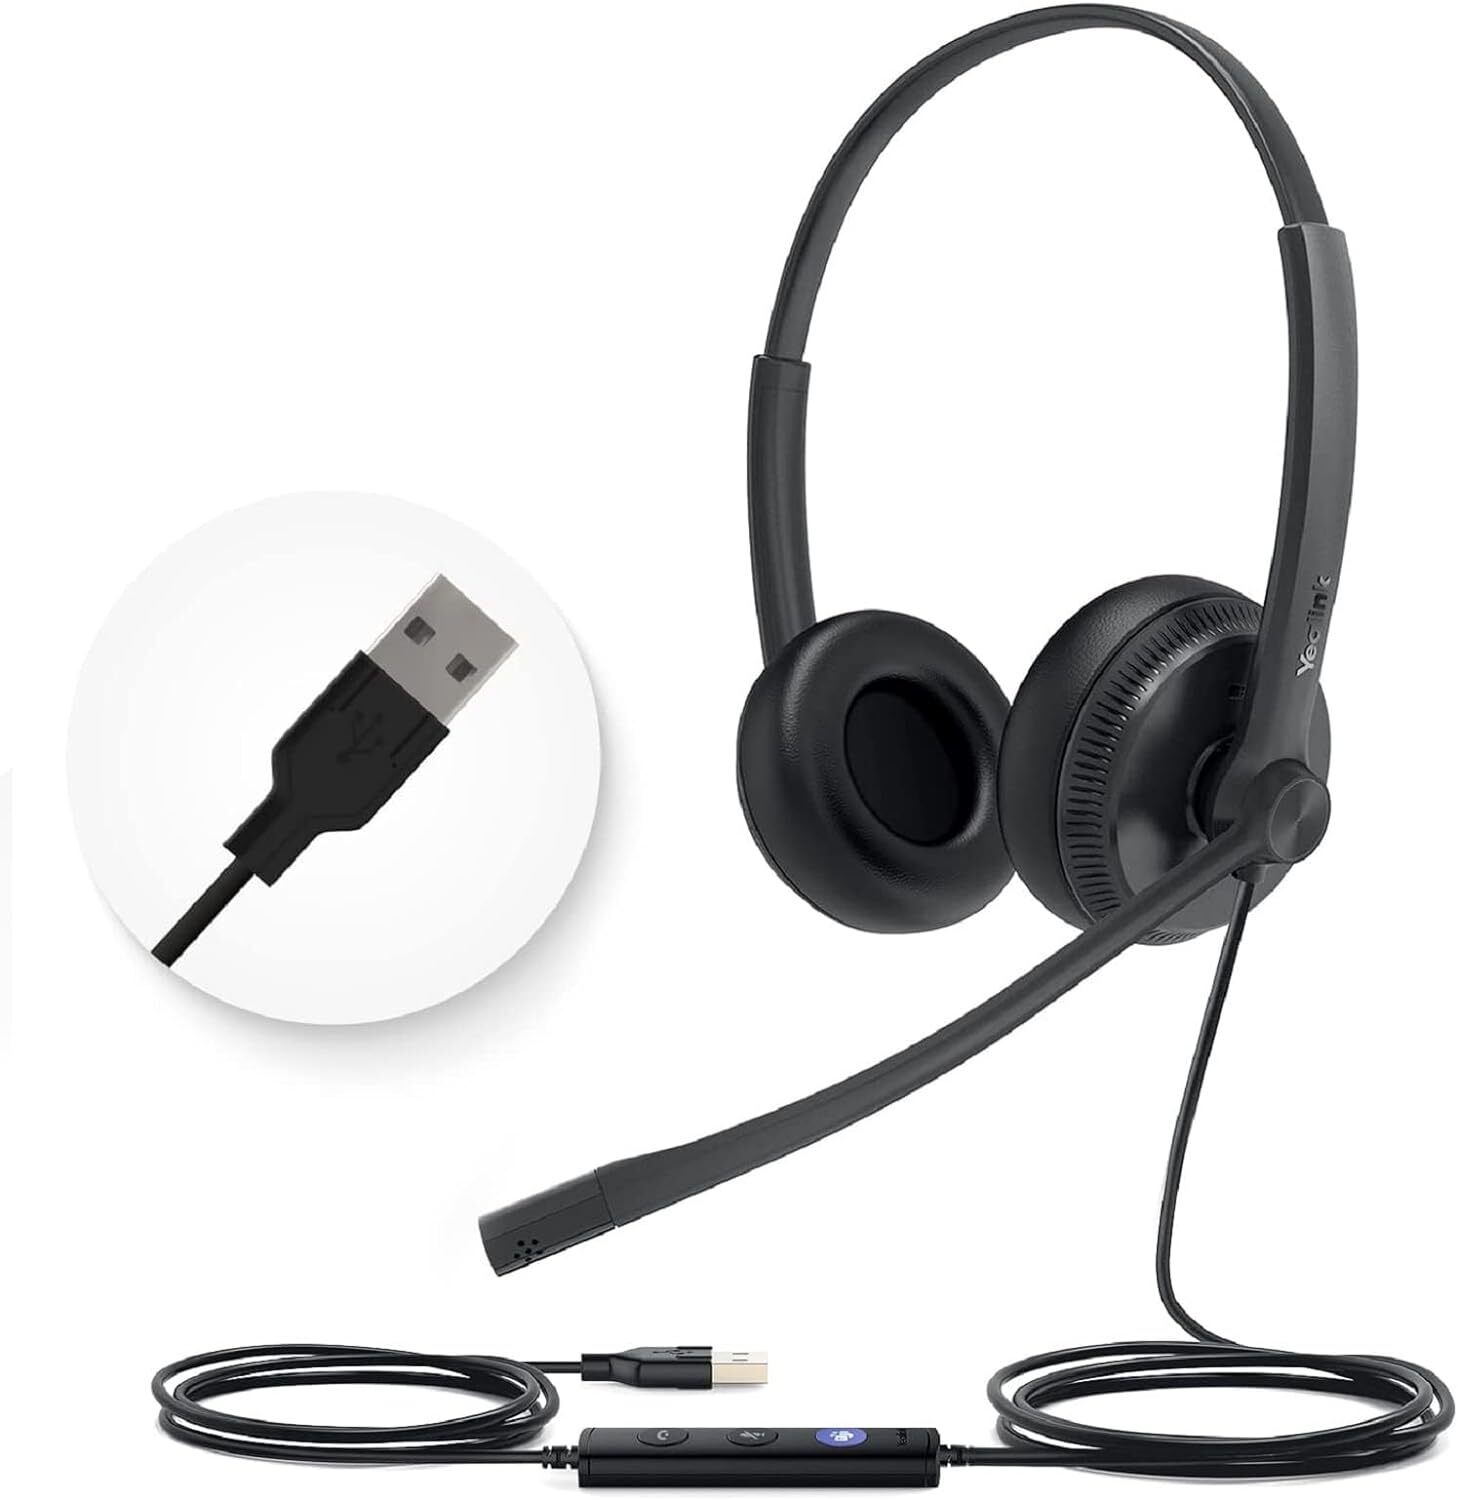 Yealink USB Wired Headset UH34 Dual with Microphone & Noise Cancelling